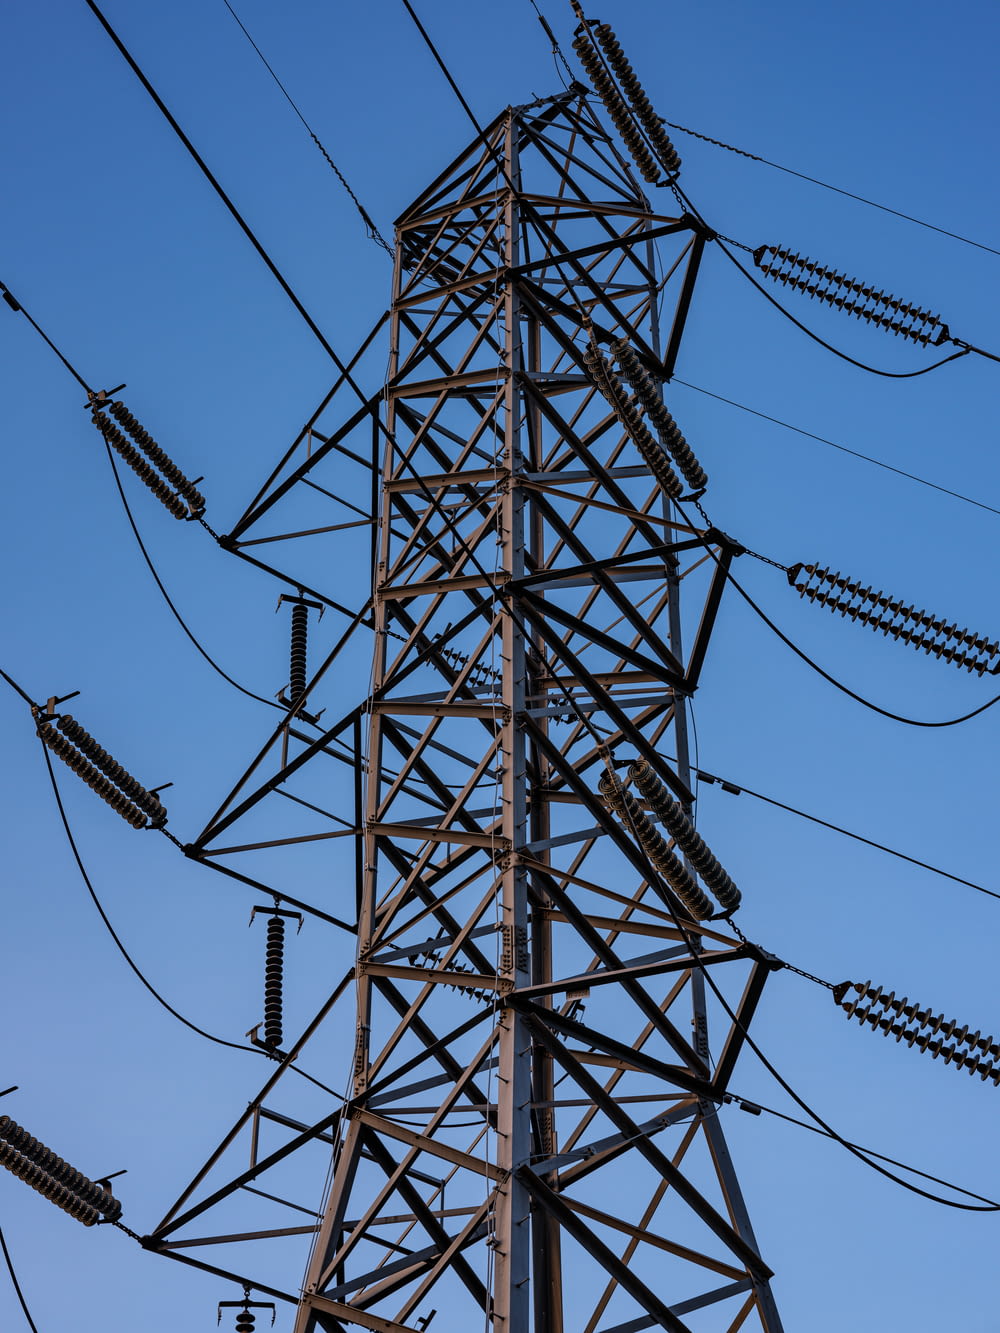 black electric towers under blue sky during daytime